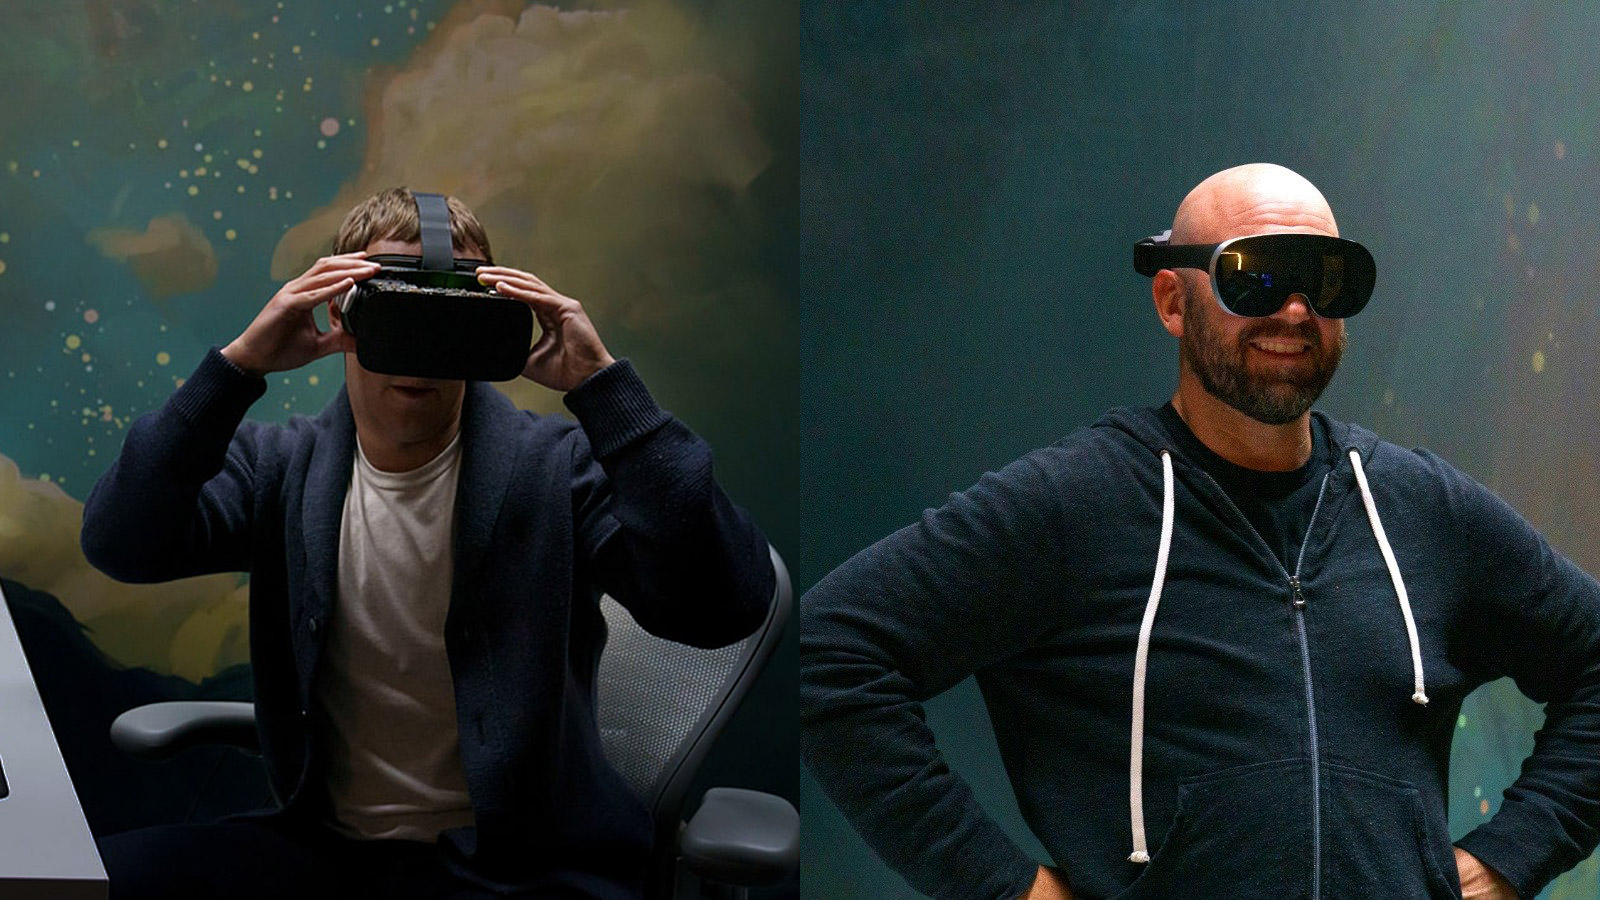 The New Virtual Reality: Inside the Design of Oculus Rift